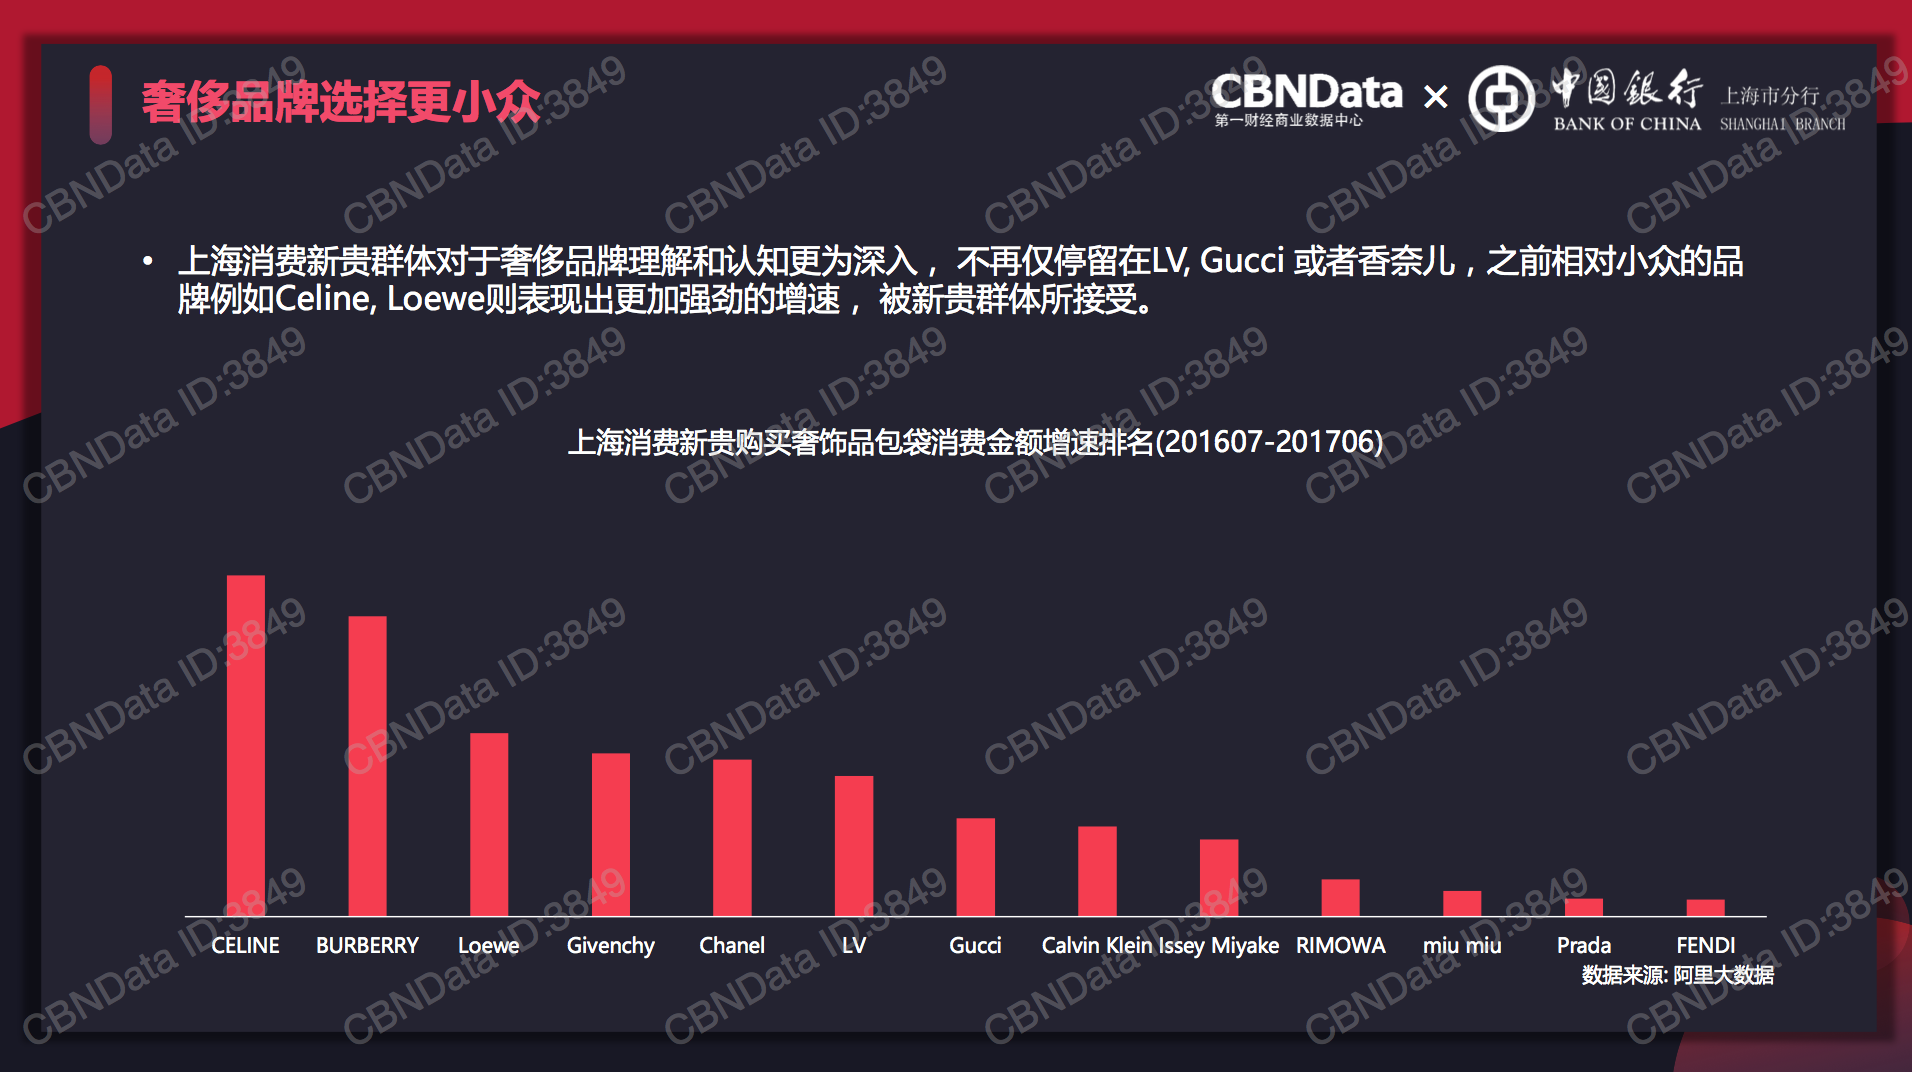 Top handbags brands purchased by post-90s affluent consumers in Shanghai. Data source: Alibaba big data.